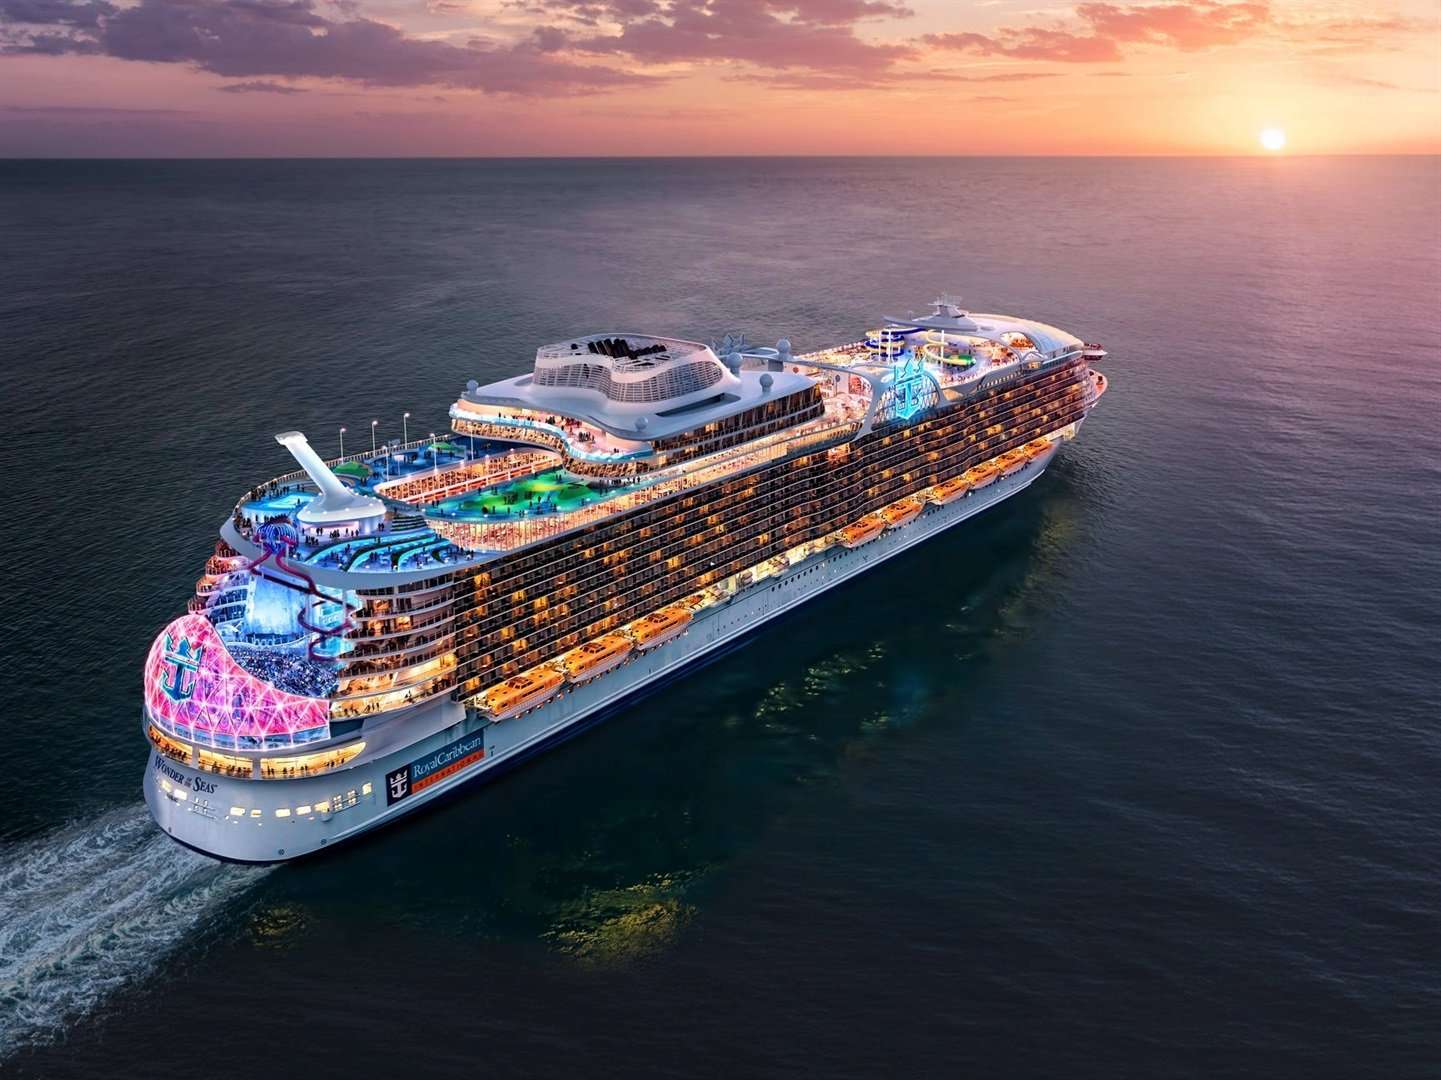 Royal Caribbean is building the new world